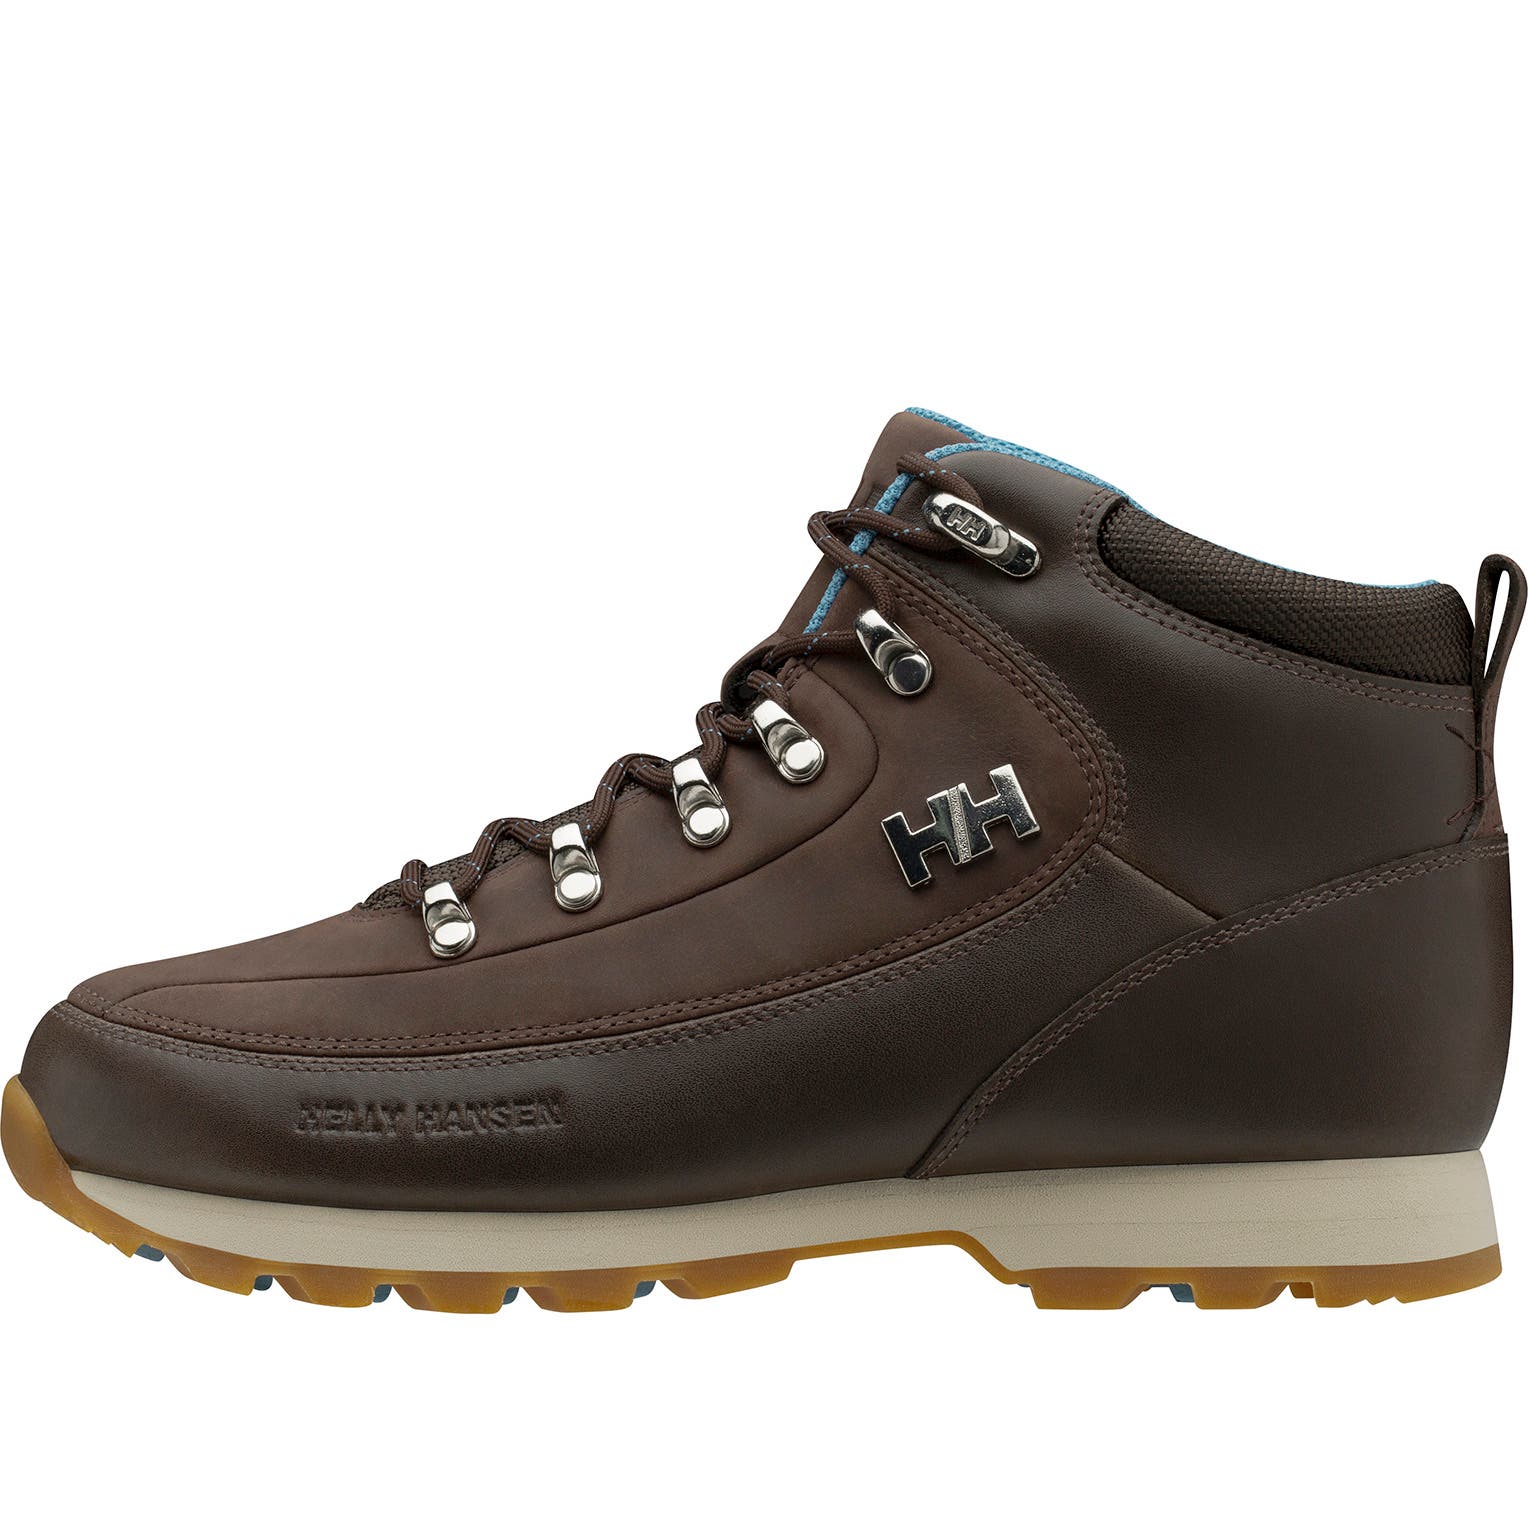 Helly Hansen Women's The Forester Winter Boot in Coffee Bean-Tundra Blue from the side